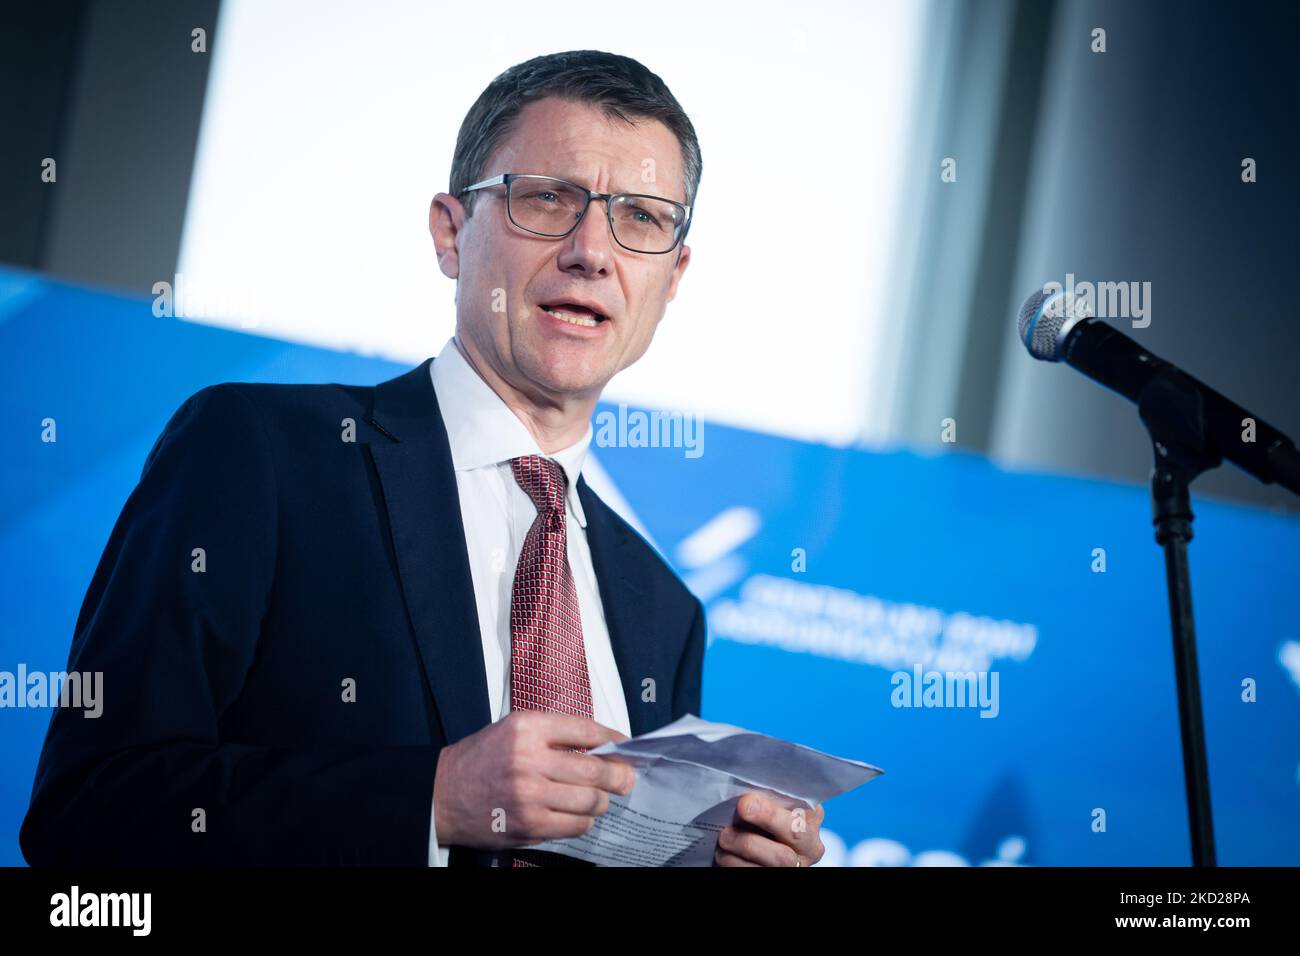 Andrew Gibson (Jacobs) during the press conference on air traffic forecasts for Poland and the new Central Polish Airport (Solidarity Transport Hub) prepared by the IATA, at Chopin Airport in Warsaw, Poland, on 8 February 2022 (Photo by Mateusz Wlodarczyk/NurPhoto) Stock Photo